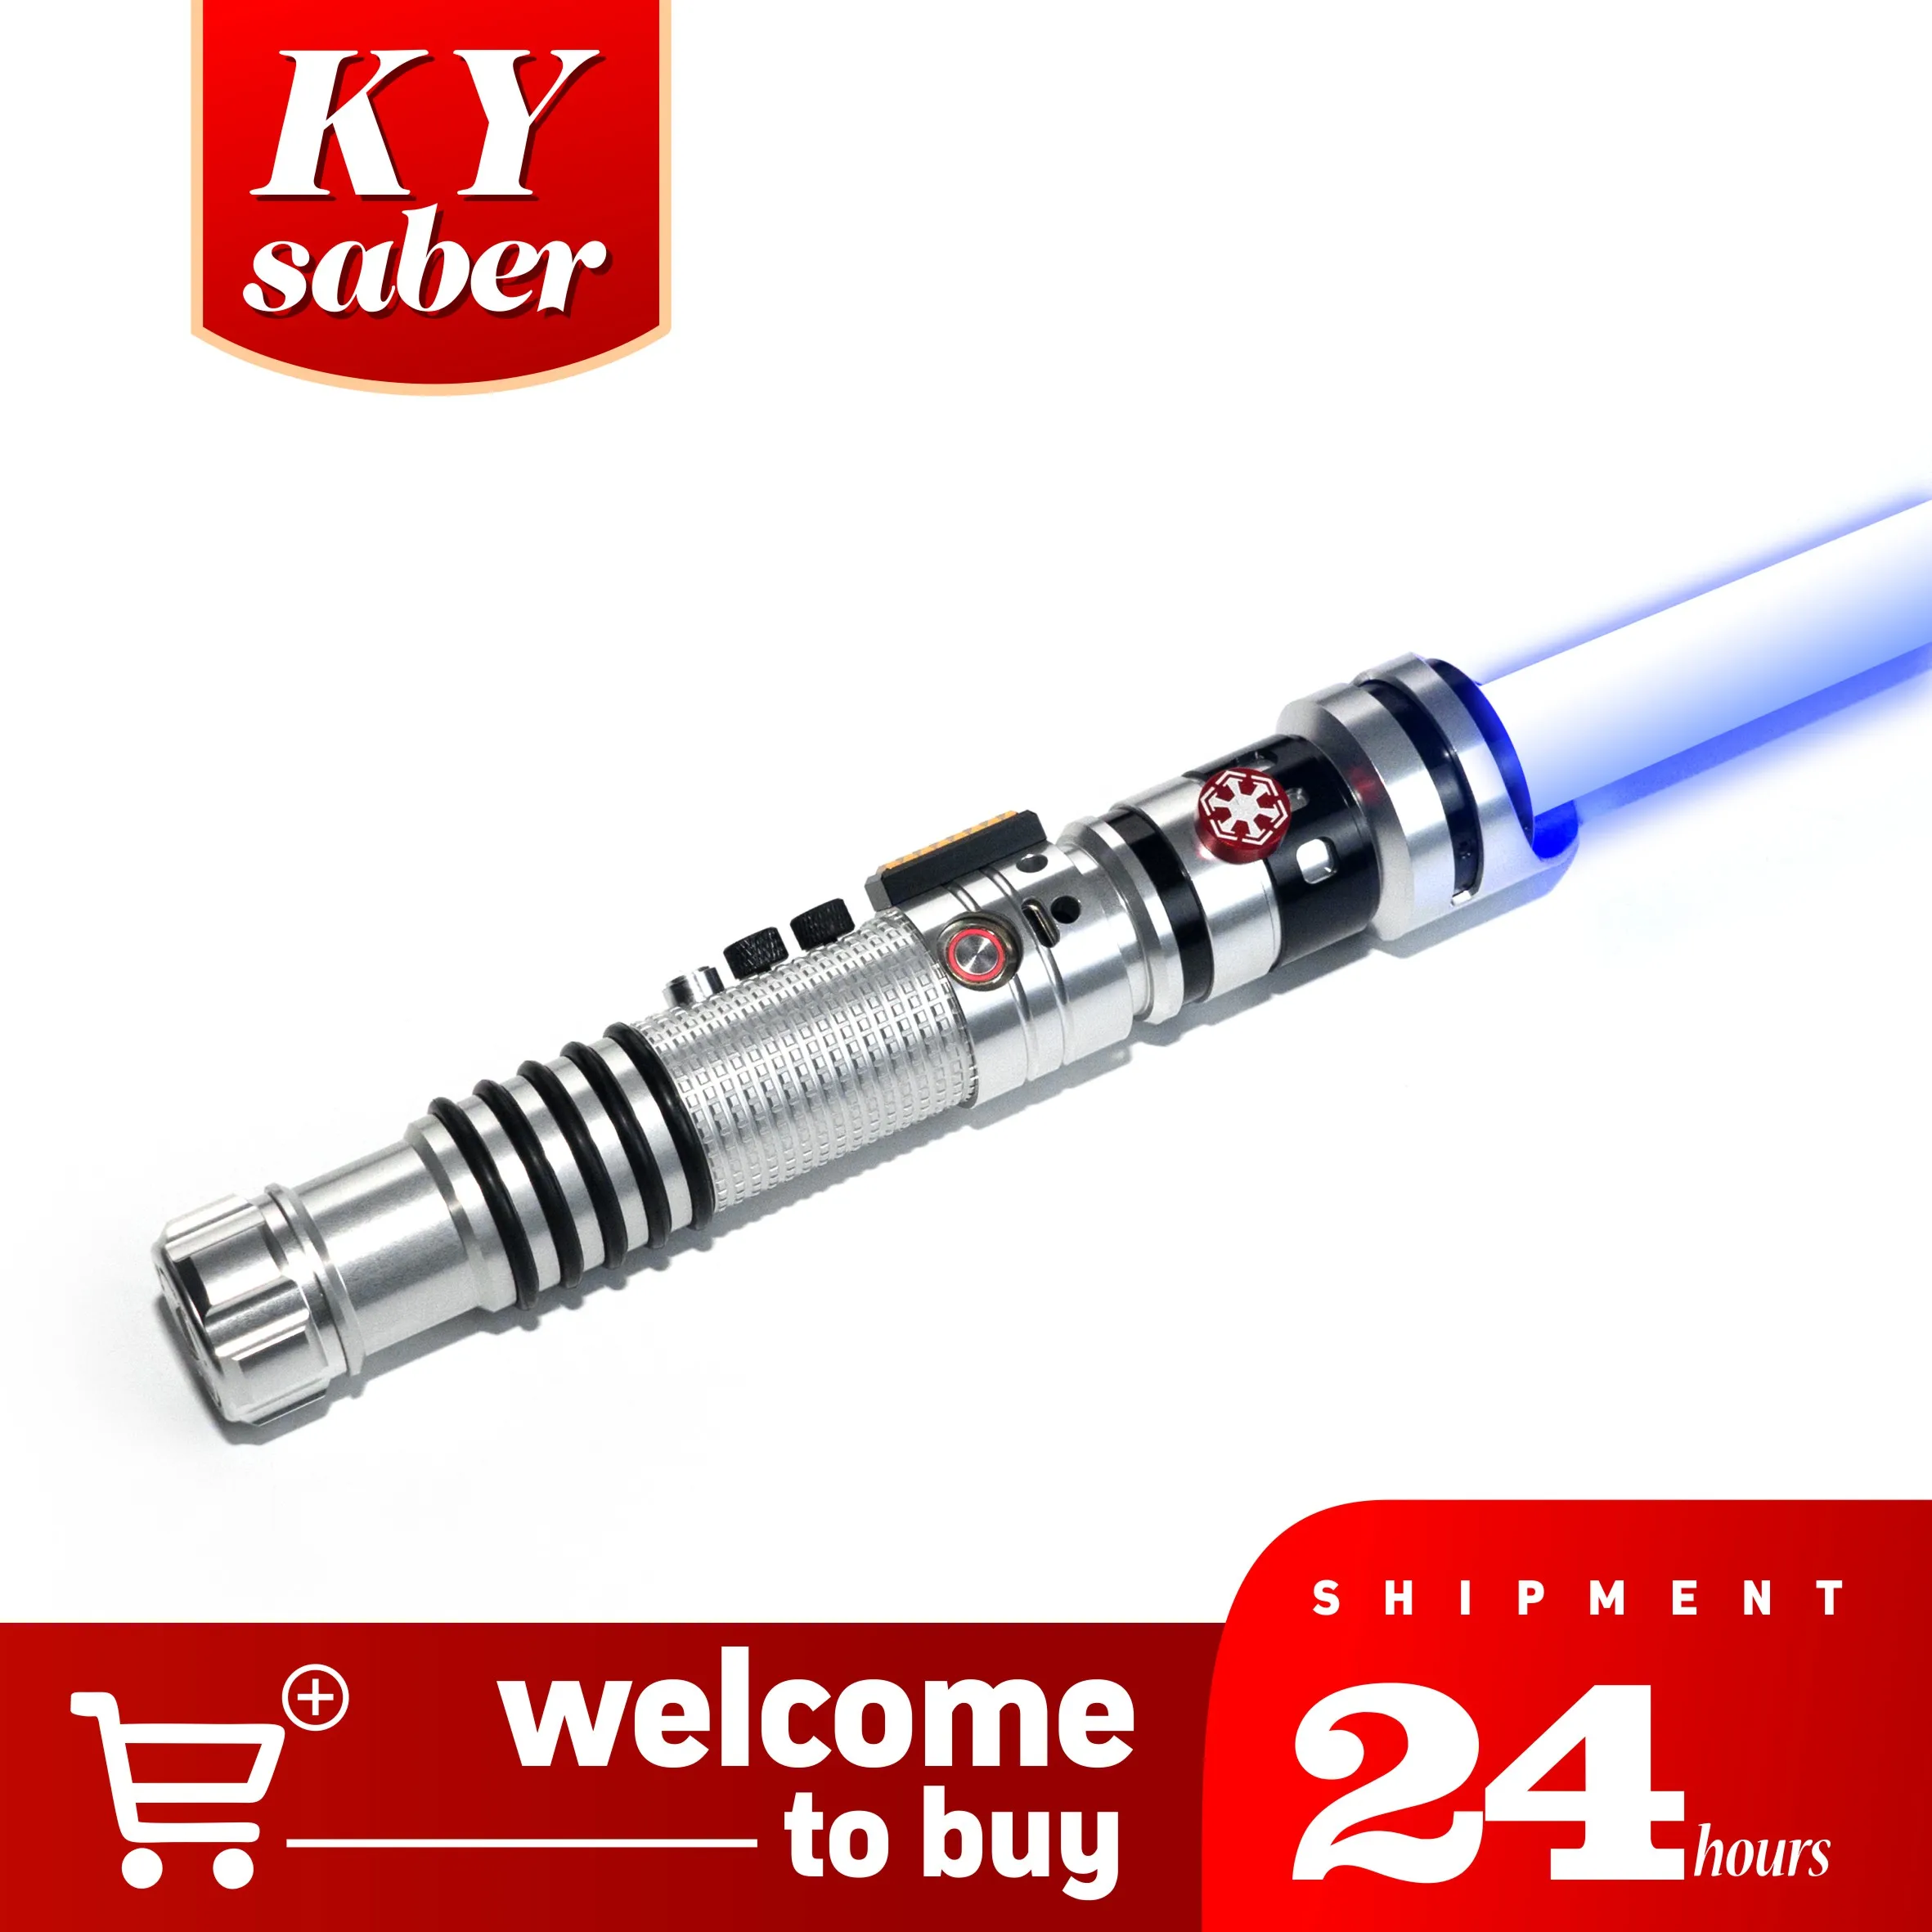 

X03-Lightsaber RGB/Pixel 26+ sets of fonts Laser Combat Sword Gift Jedi Metal Handle Heavy Dueling Force Toys Glow NEO Luminous